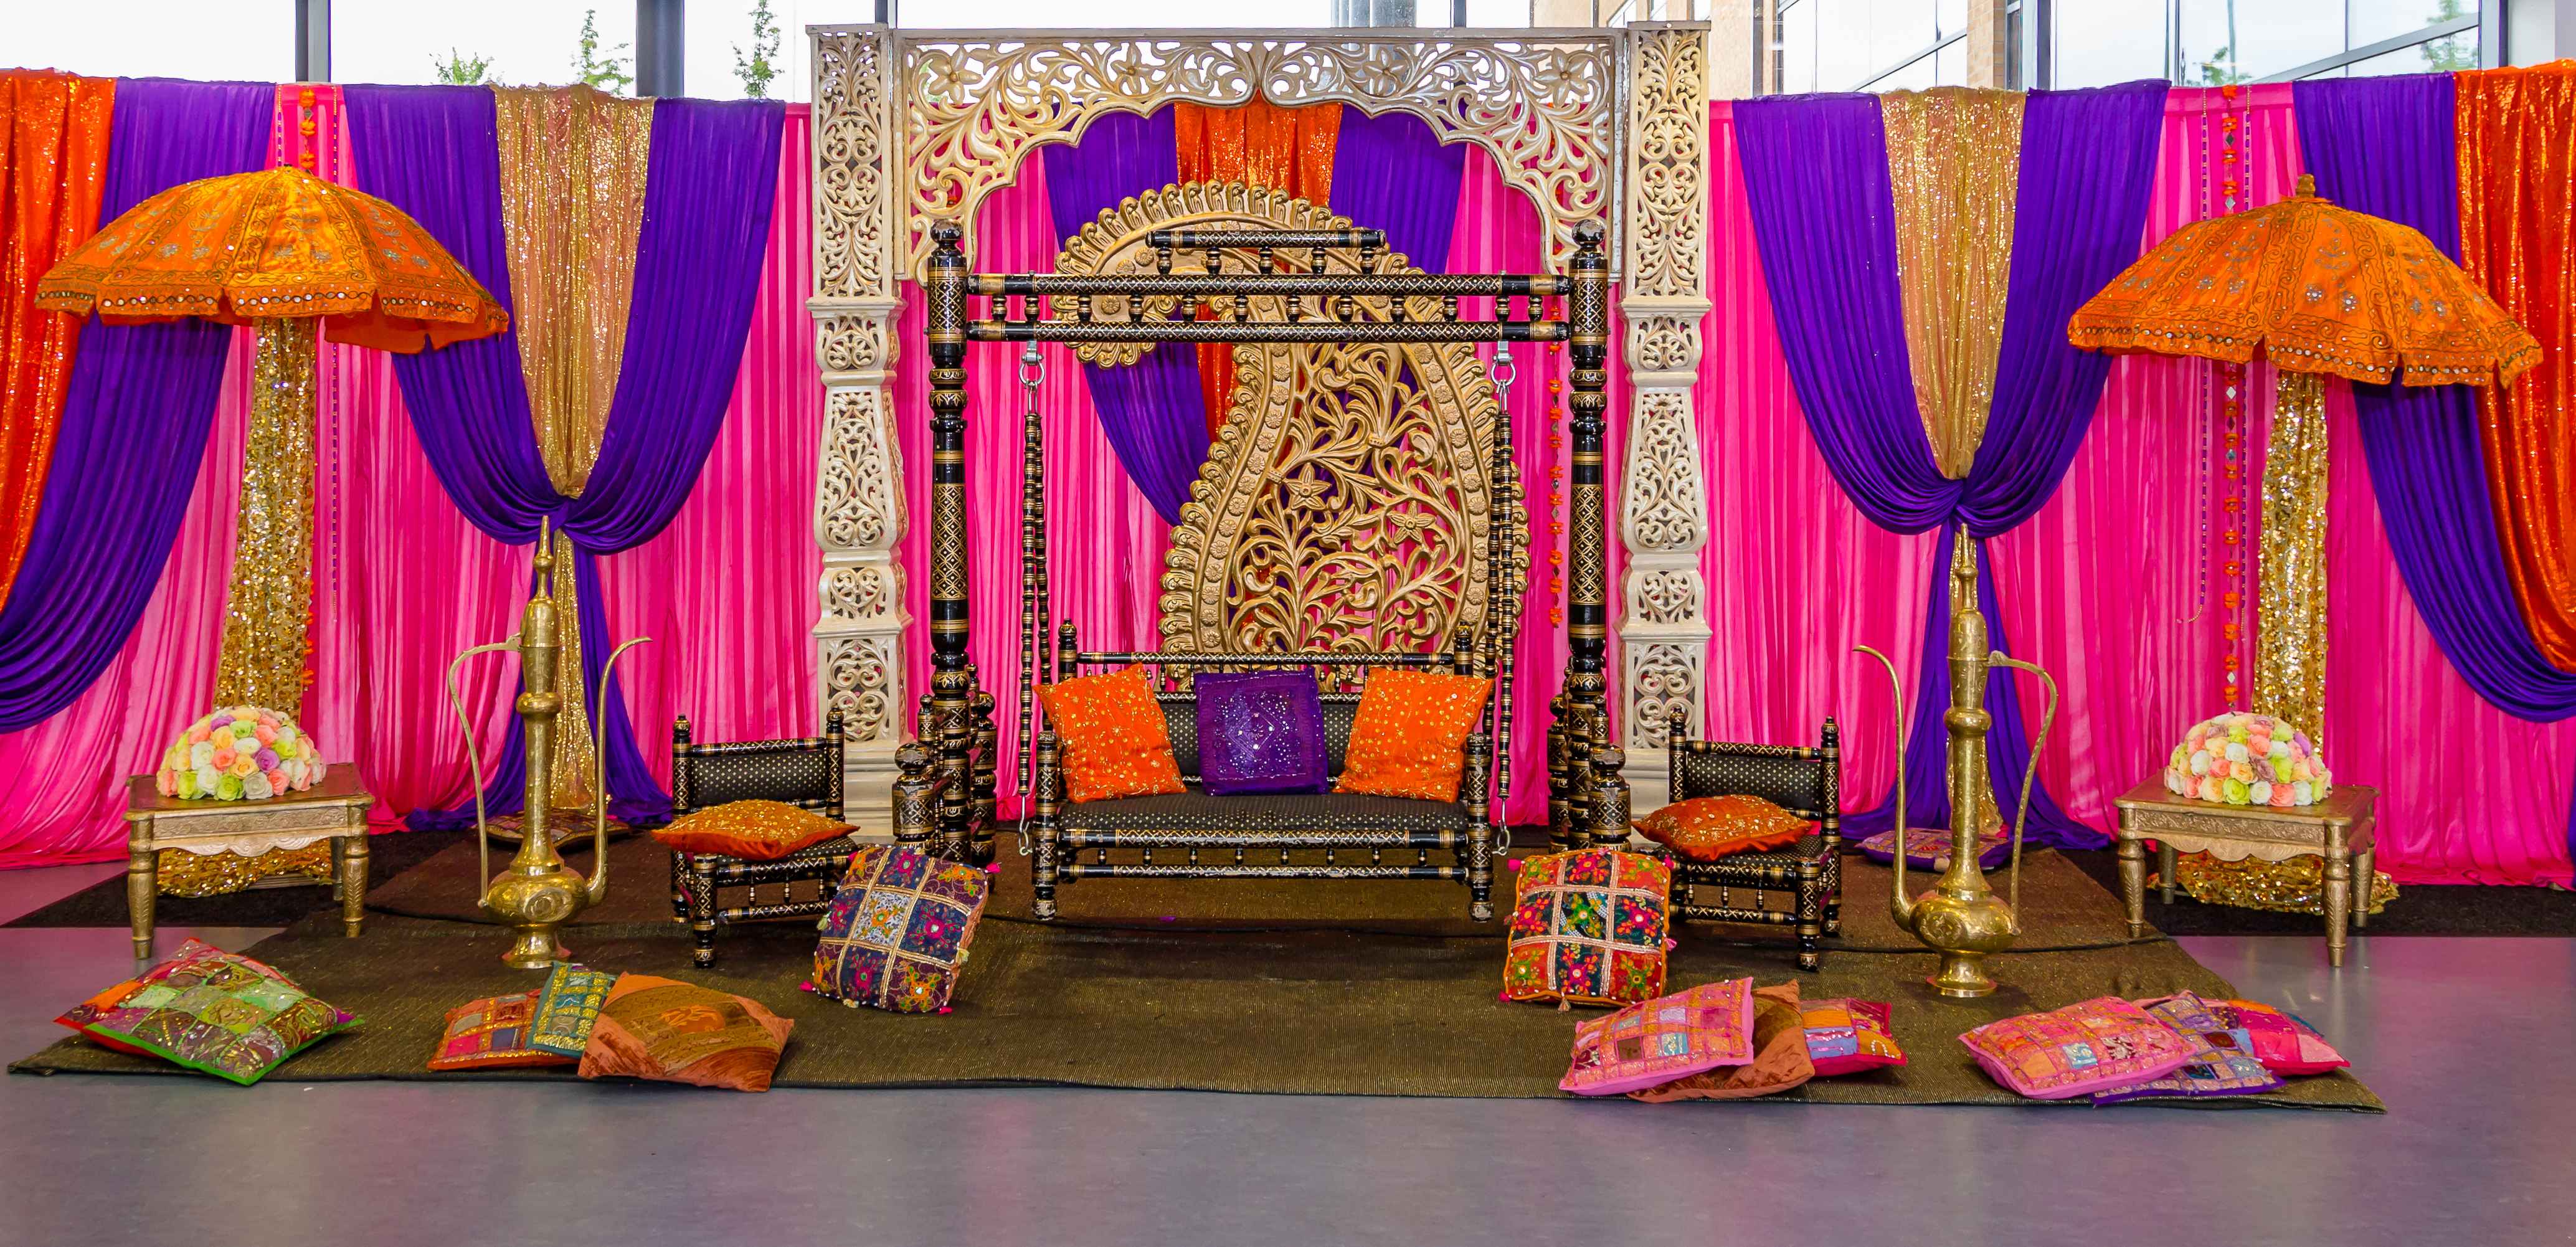 136,670 Indian Wedding Decor Images, Stock Photos, 3D objects, & Vectors |  Shutterstock